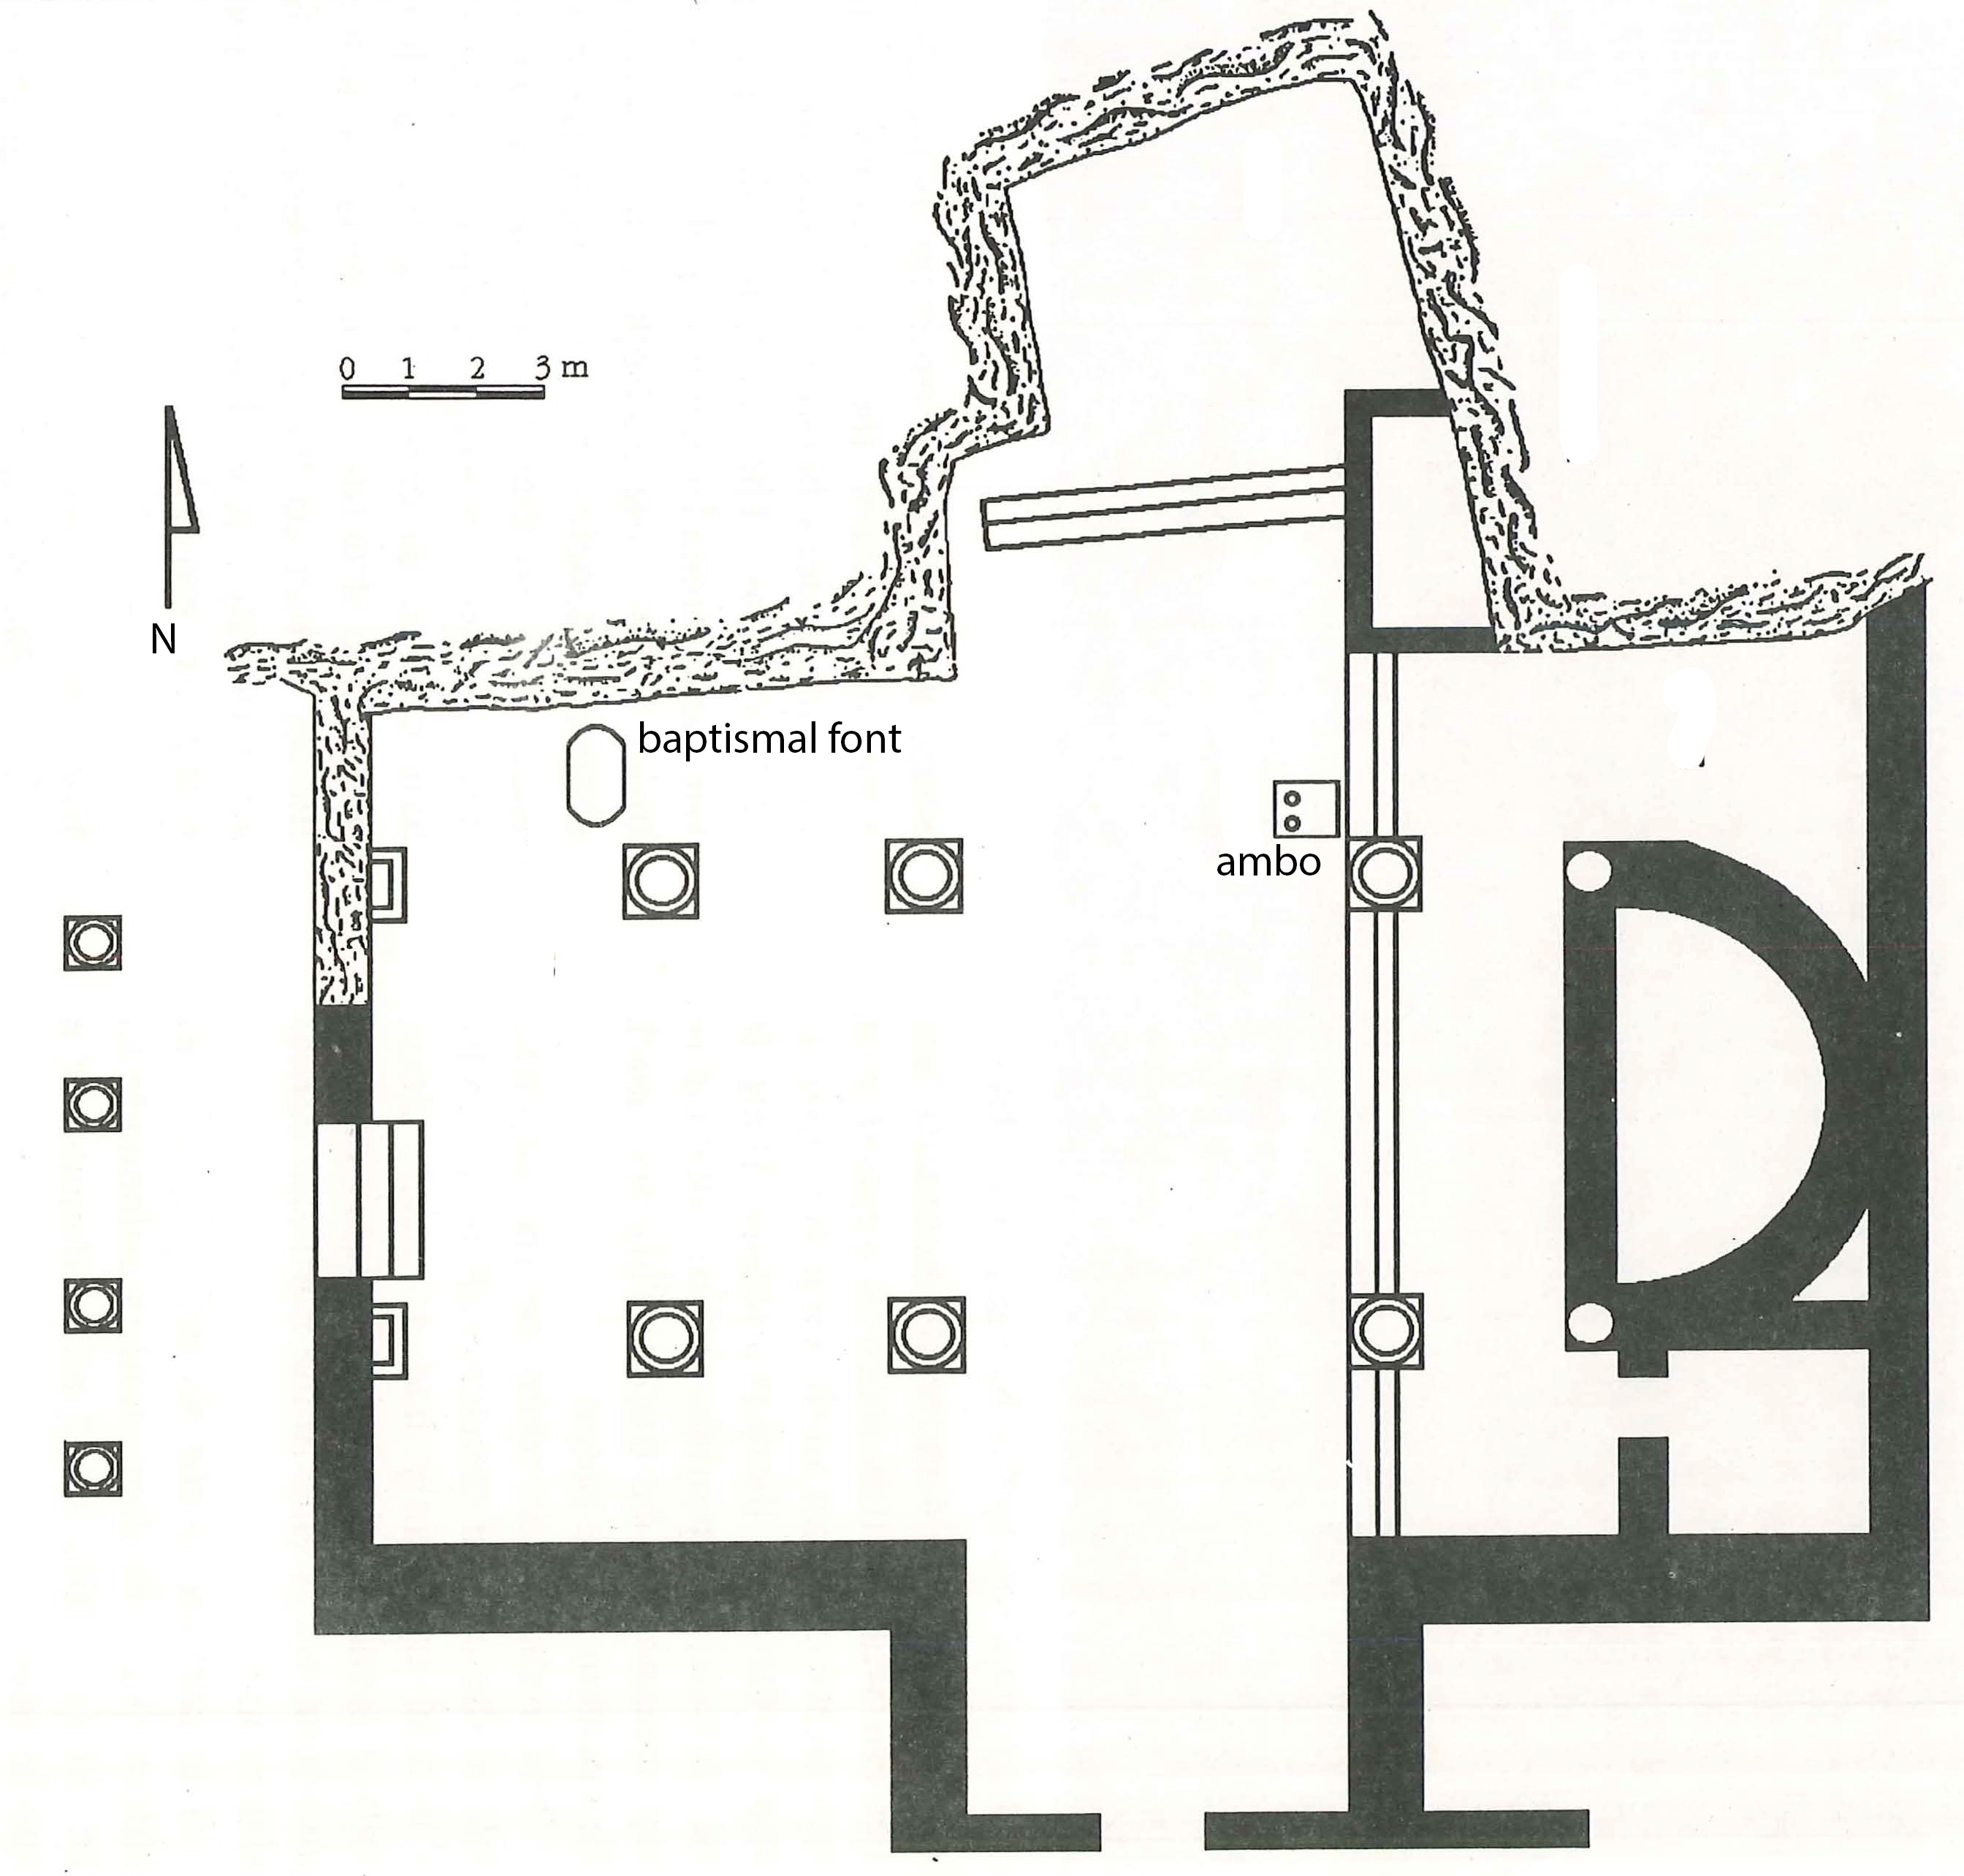 Pierre M. Bikai, May Sha’er, and Brian Fitzgerald, “The Byzantine Church at Darat Al-Funun,” Annual of the Department of Antiquities 38 (1994): 403.